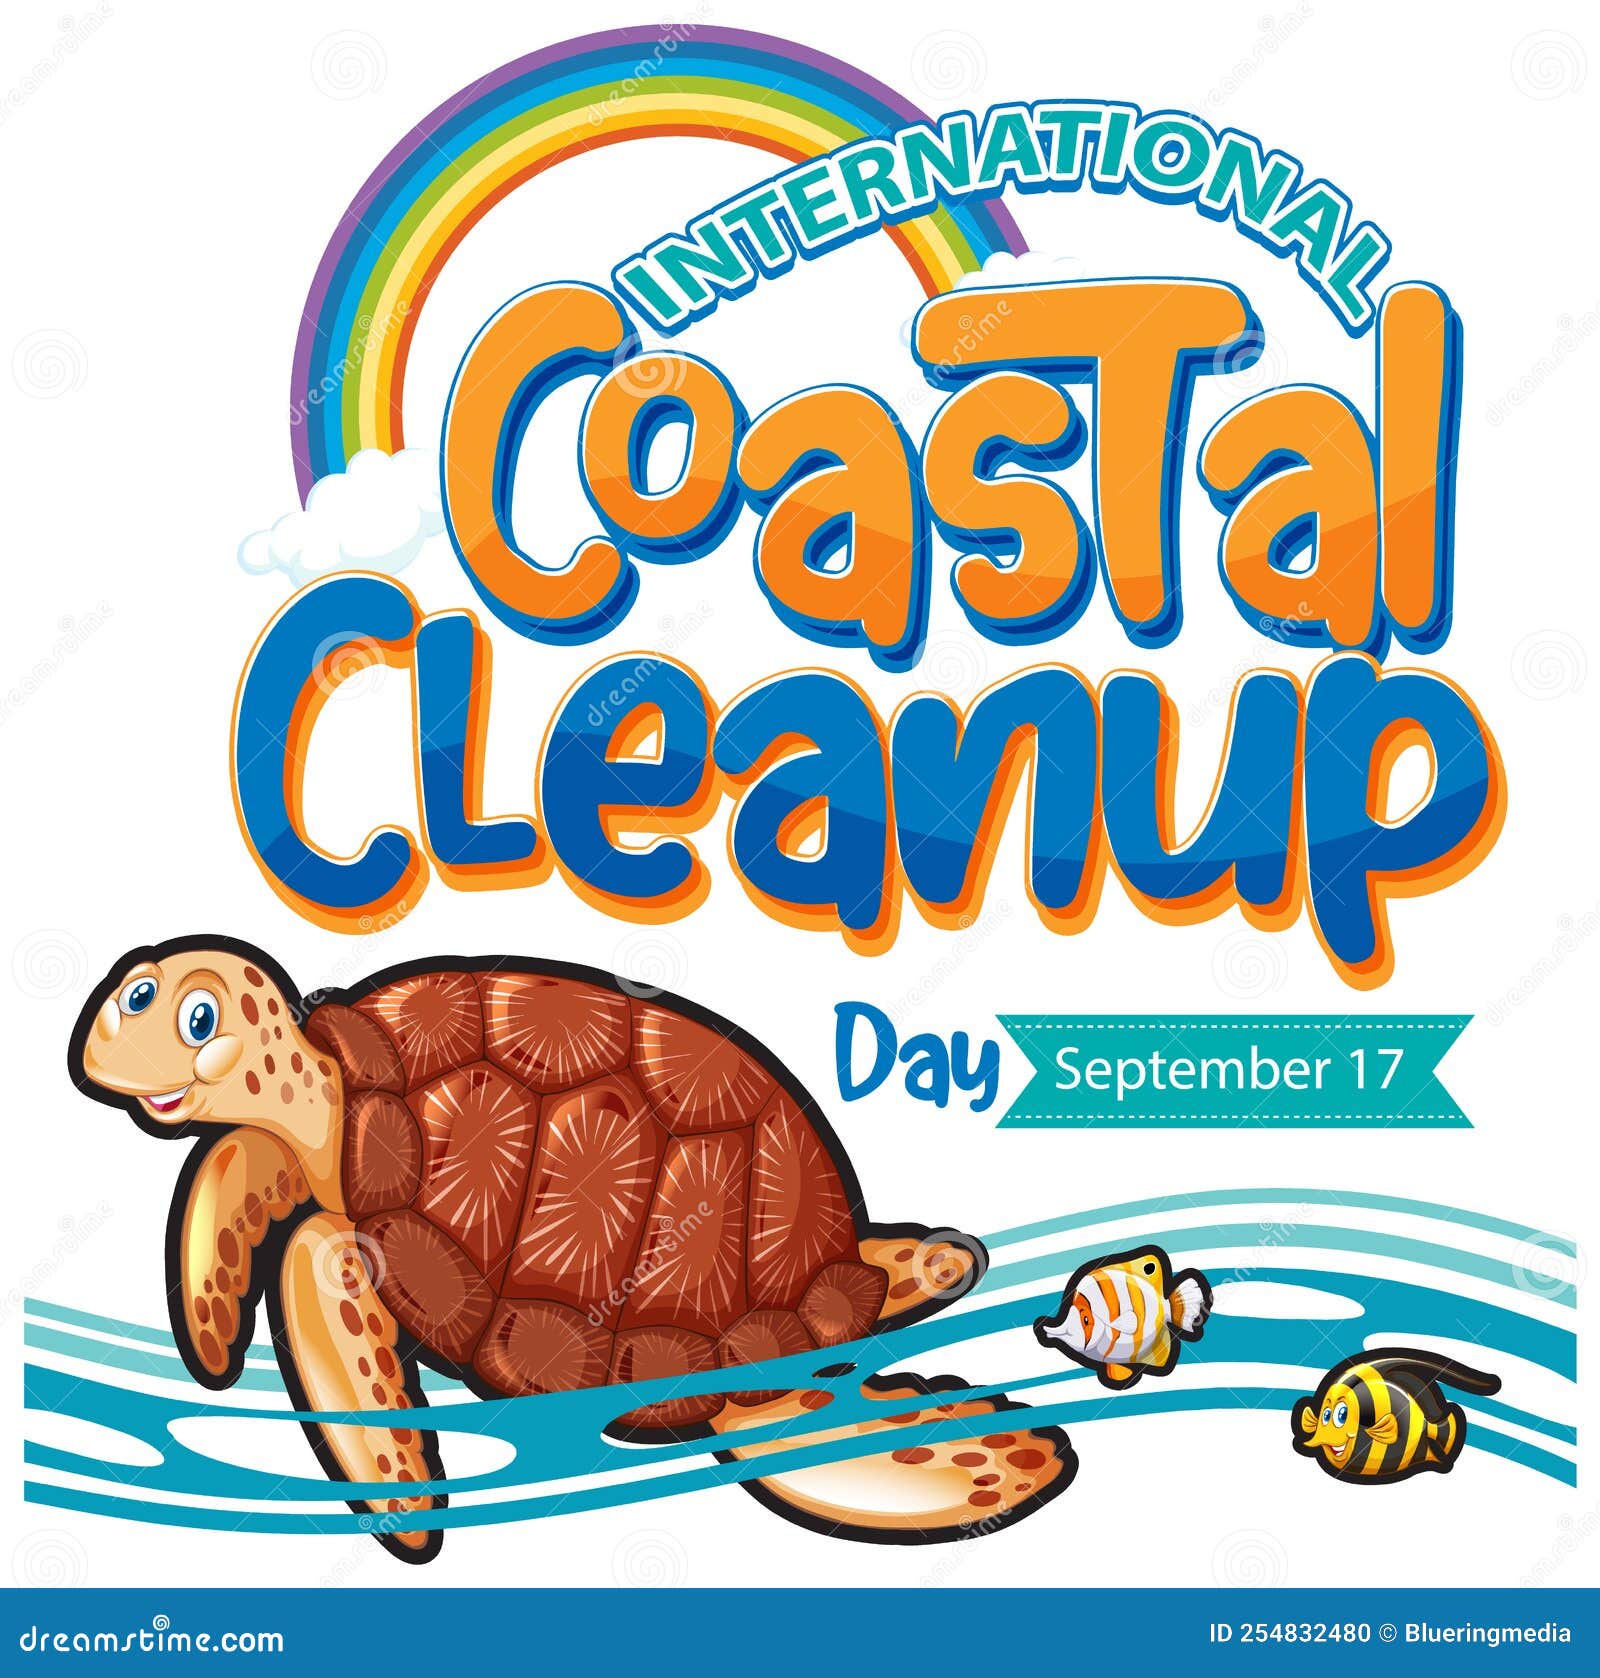 International Coastal Cleanup Day Poster Stock Vector Illustration of